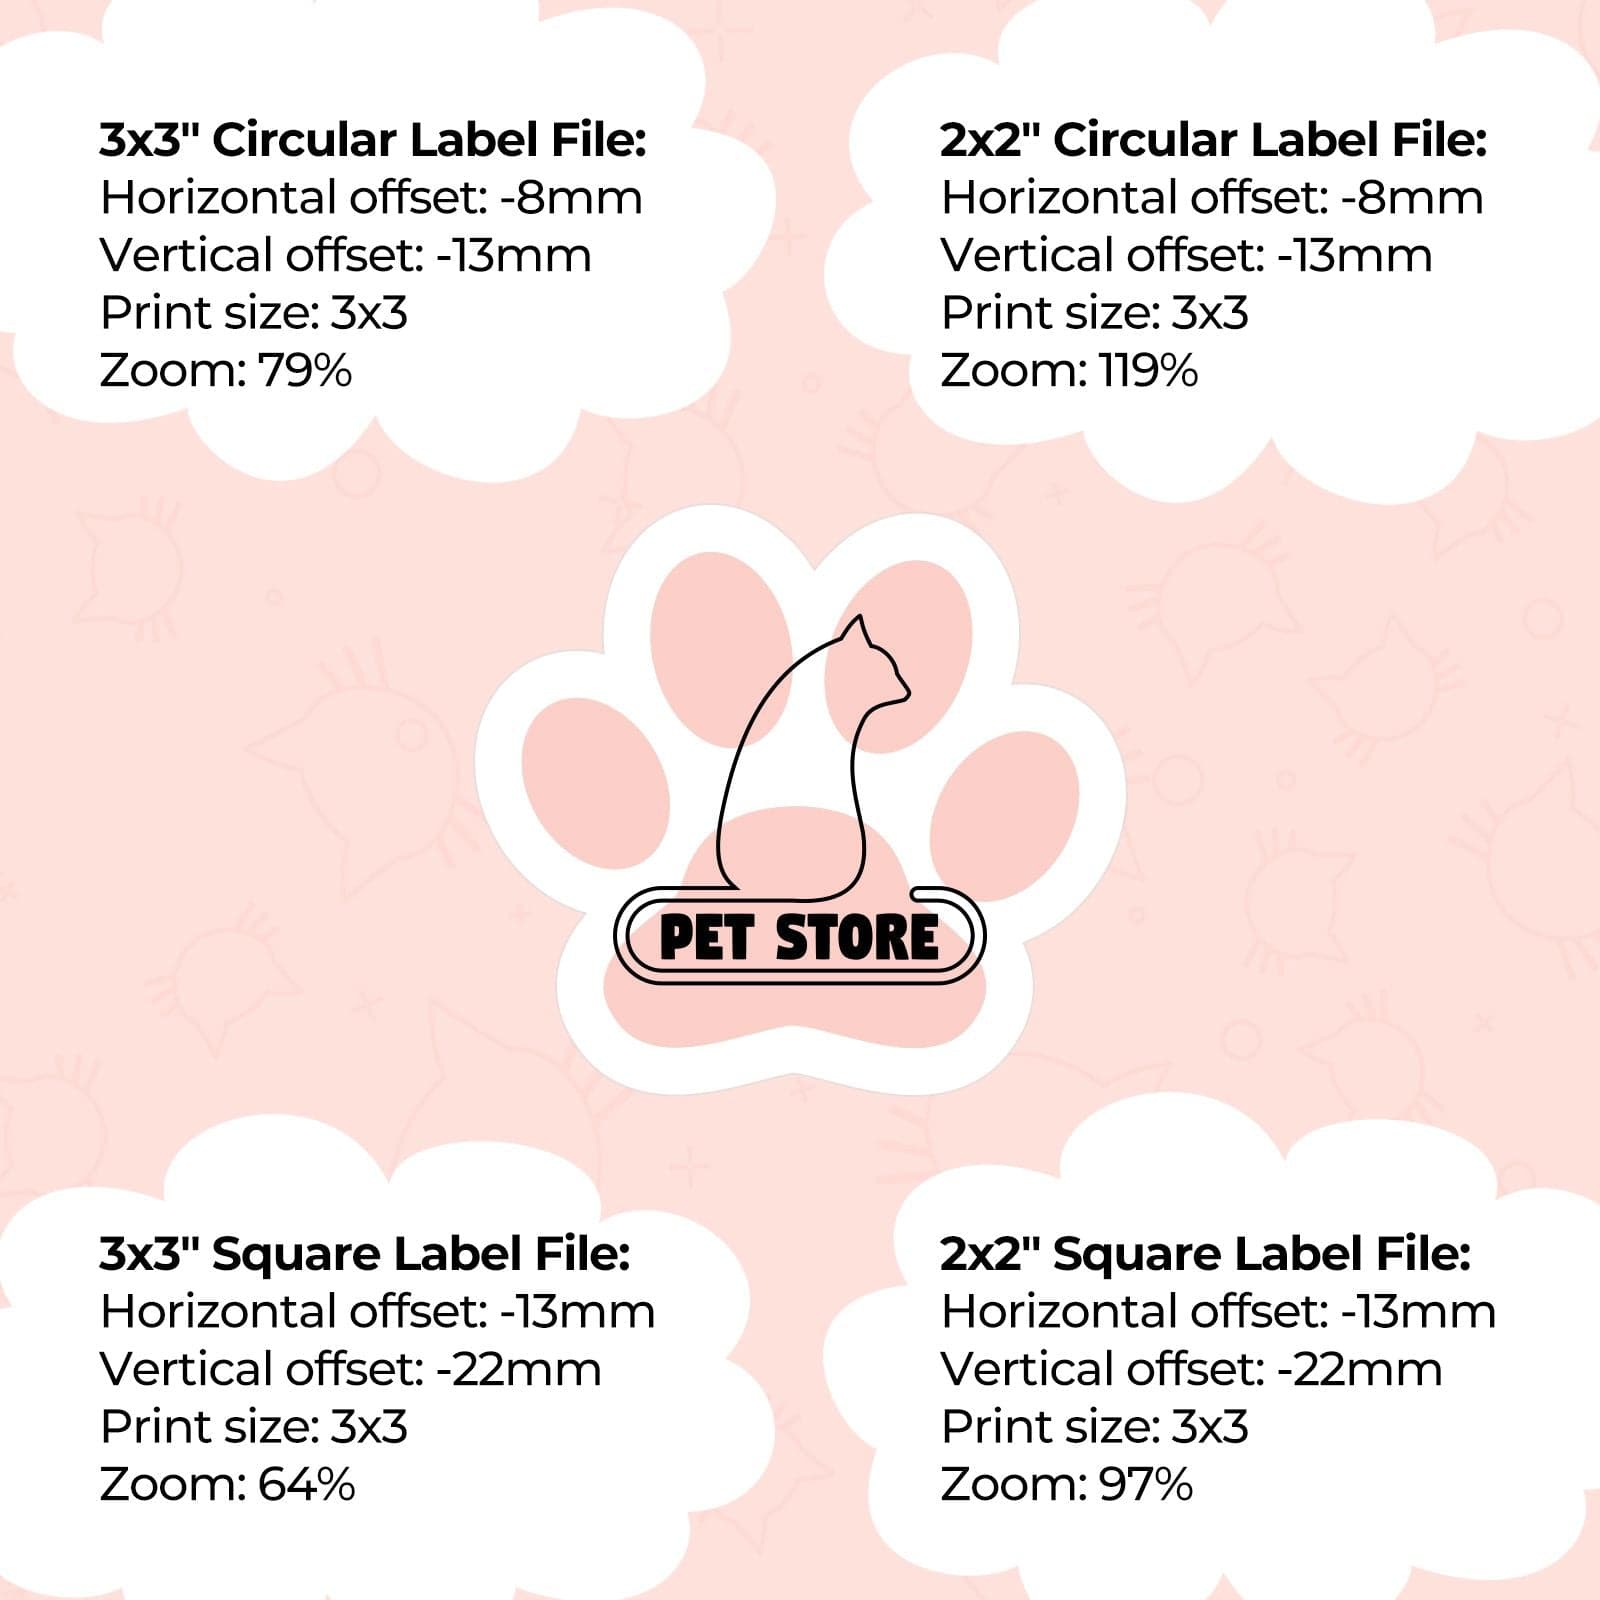 Create personalized paw print stickers for business and life.